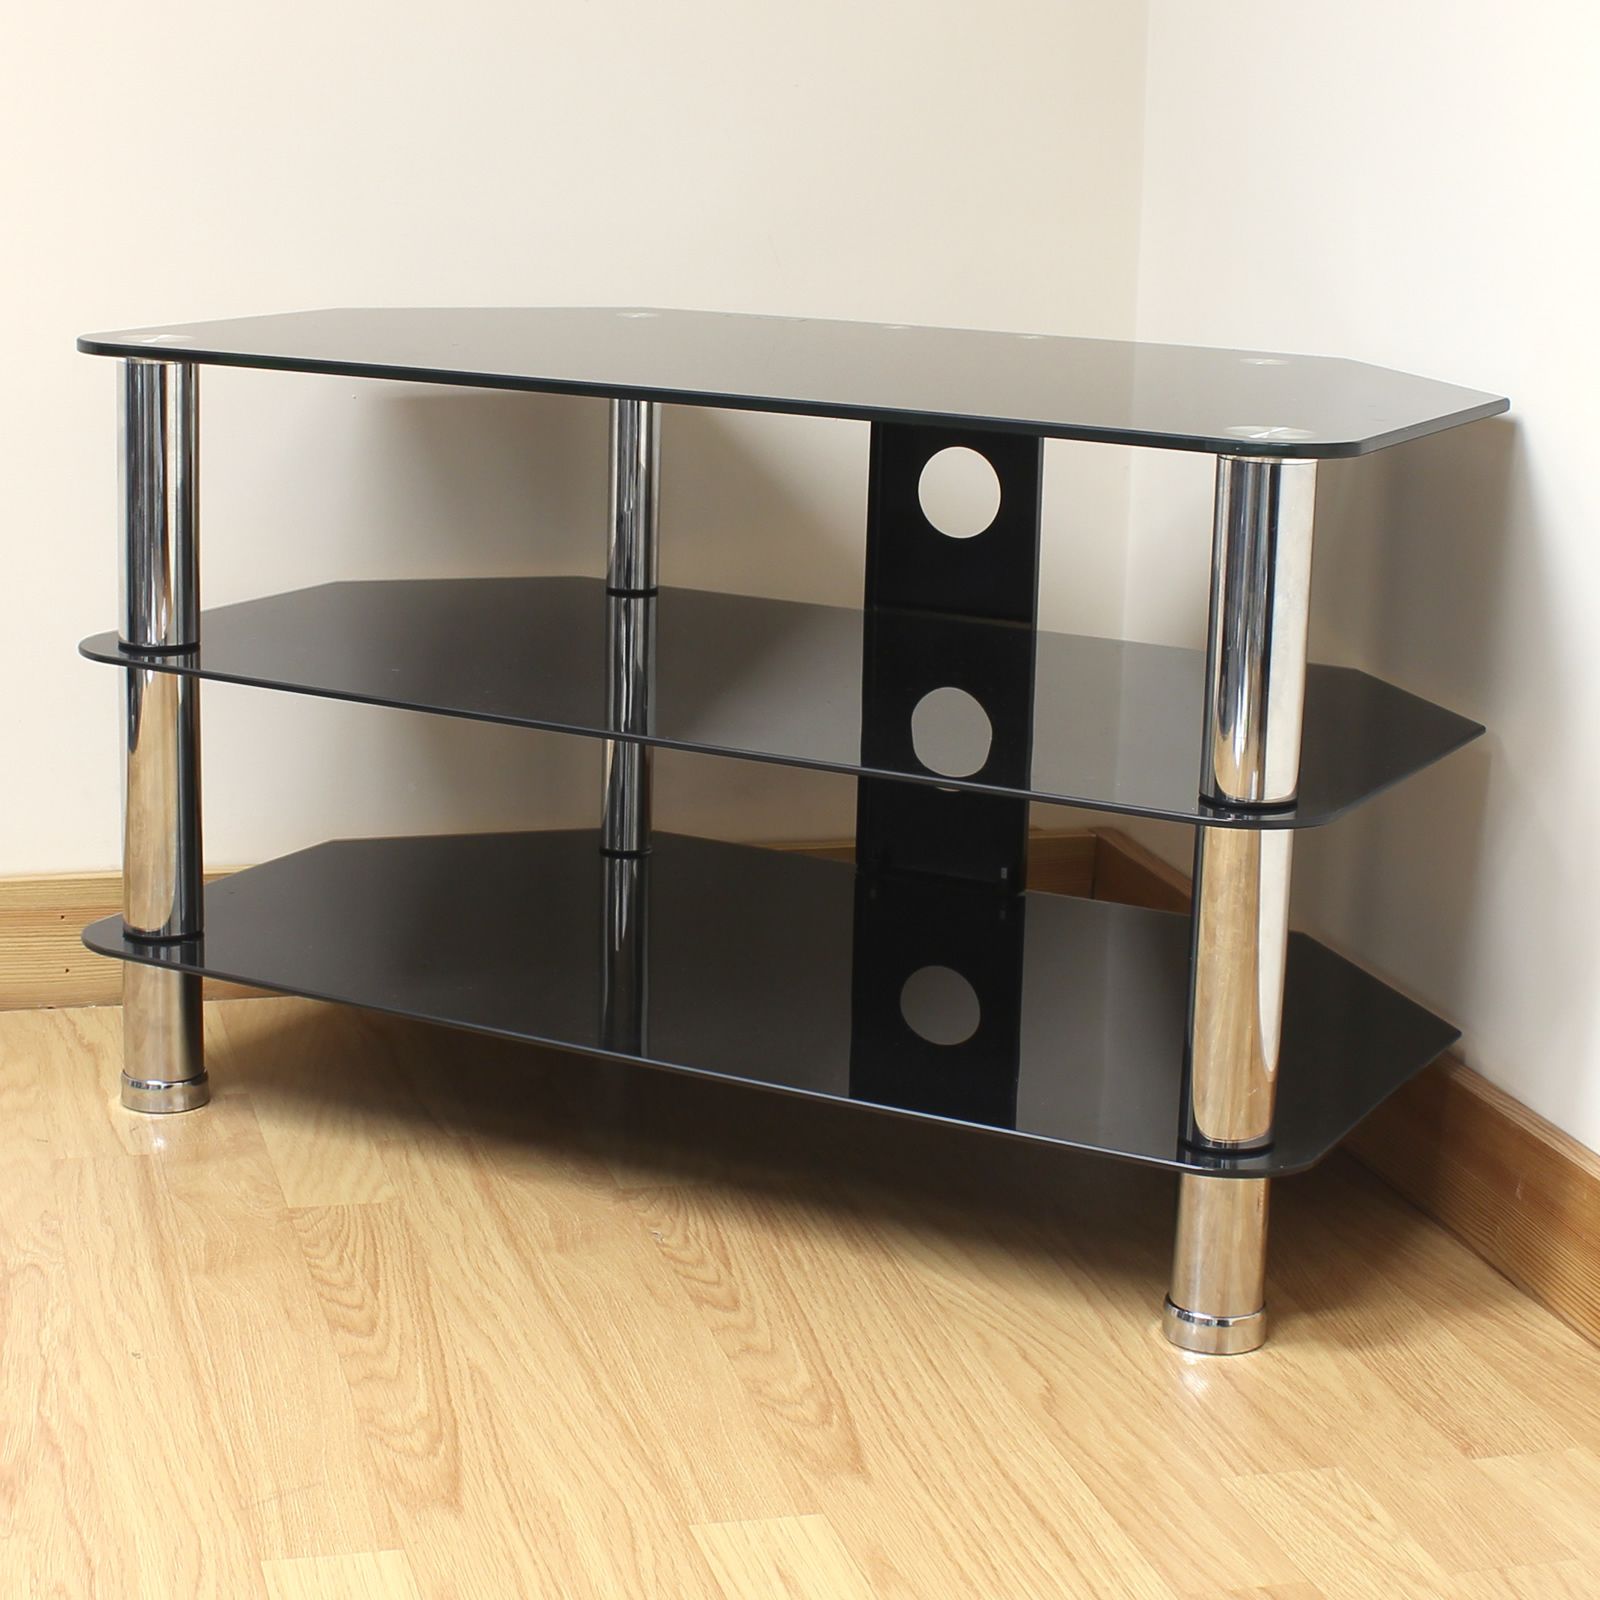 Hartleys Black Glass 3 Tier Corner Led/lcd/plasma Tv Stand With Glass Shelves Tv Stands For Tvs Up To 50" (View 9 of 20)